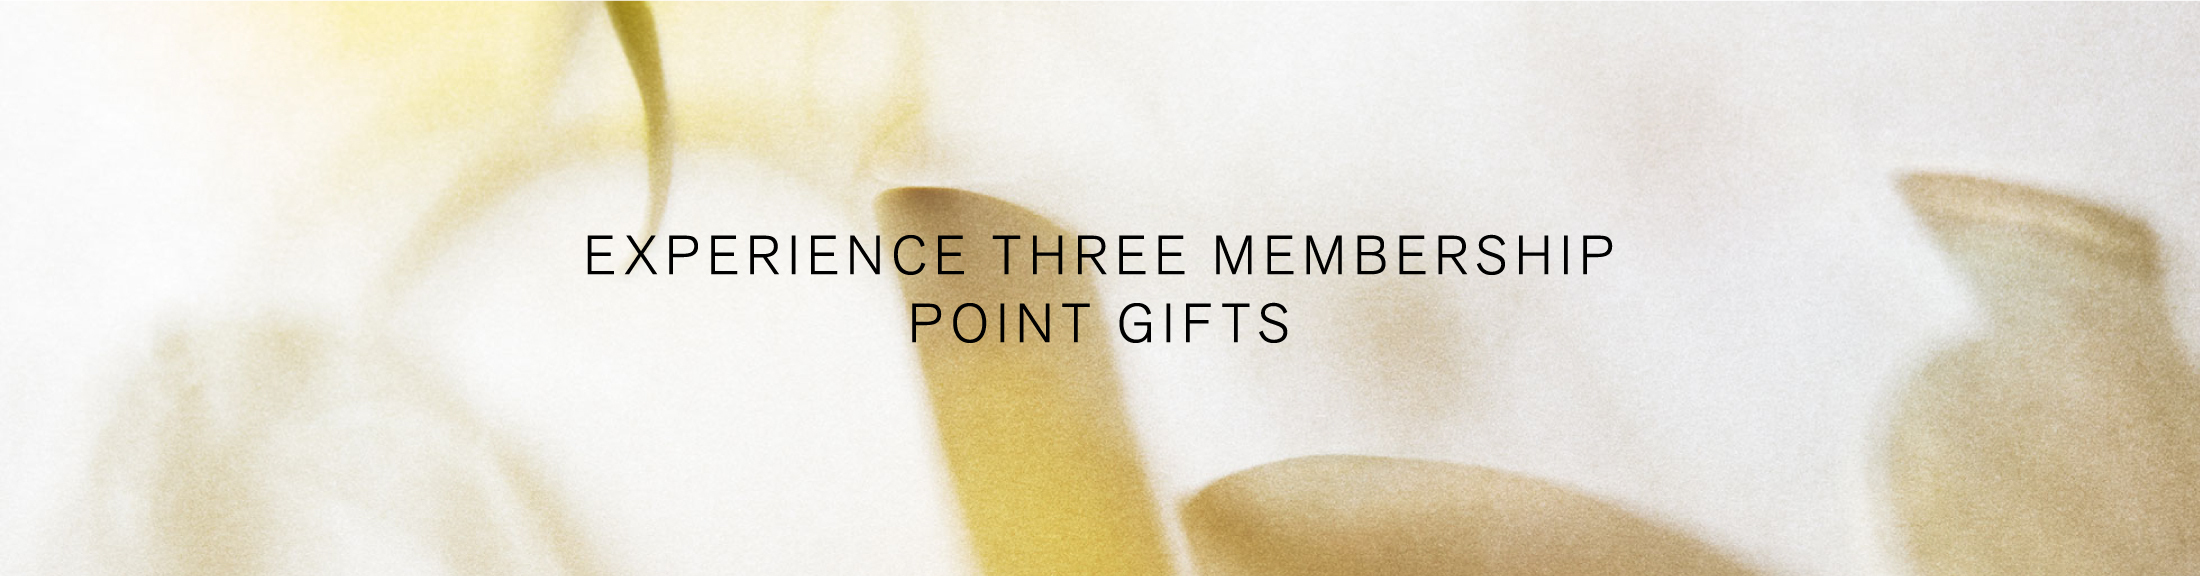 pointgifts